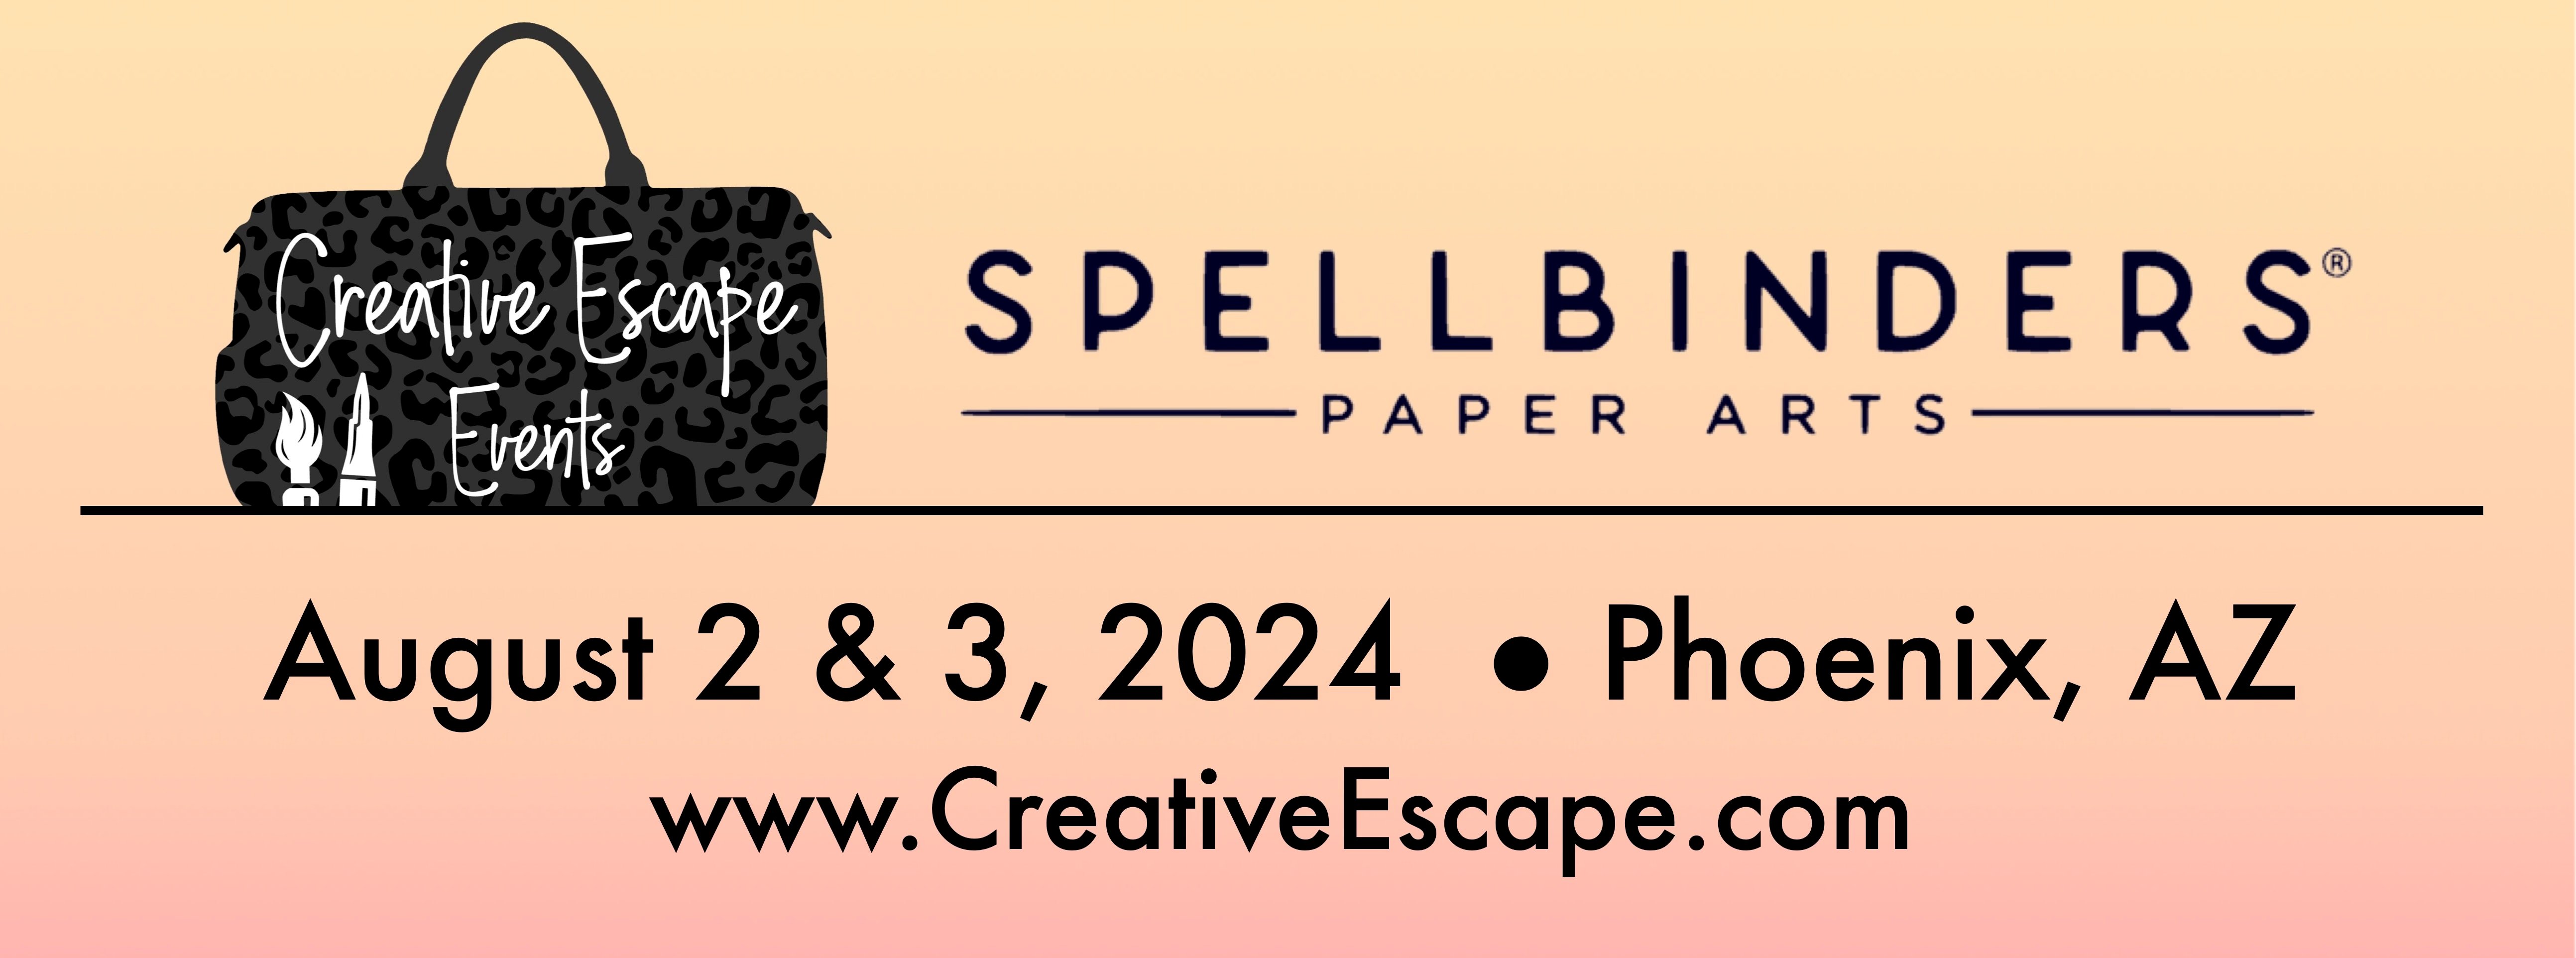 Creative Escape Events at Spellbinders